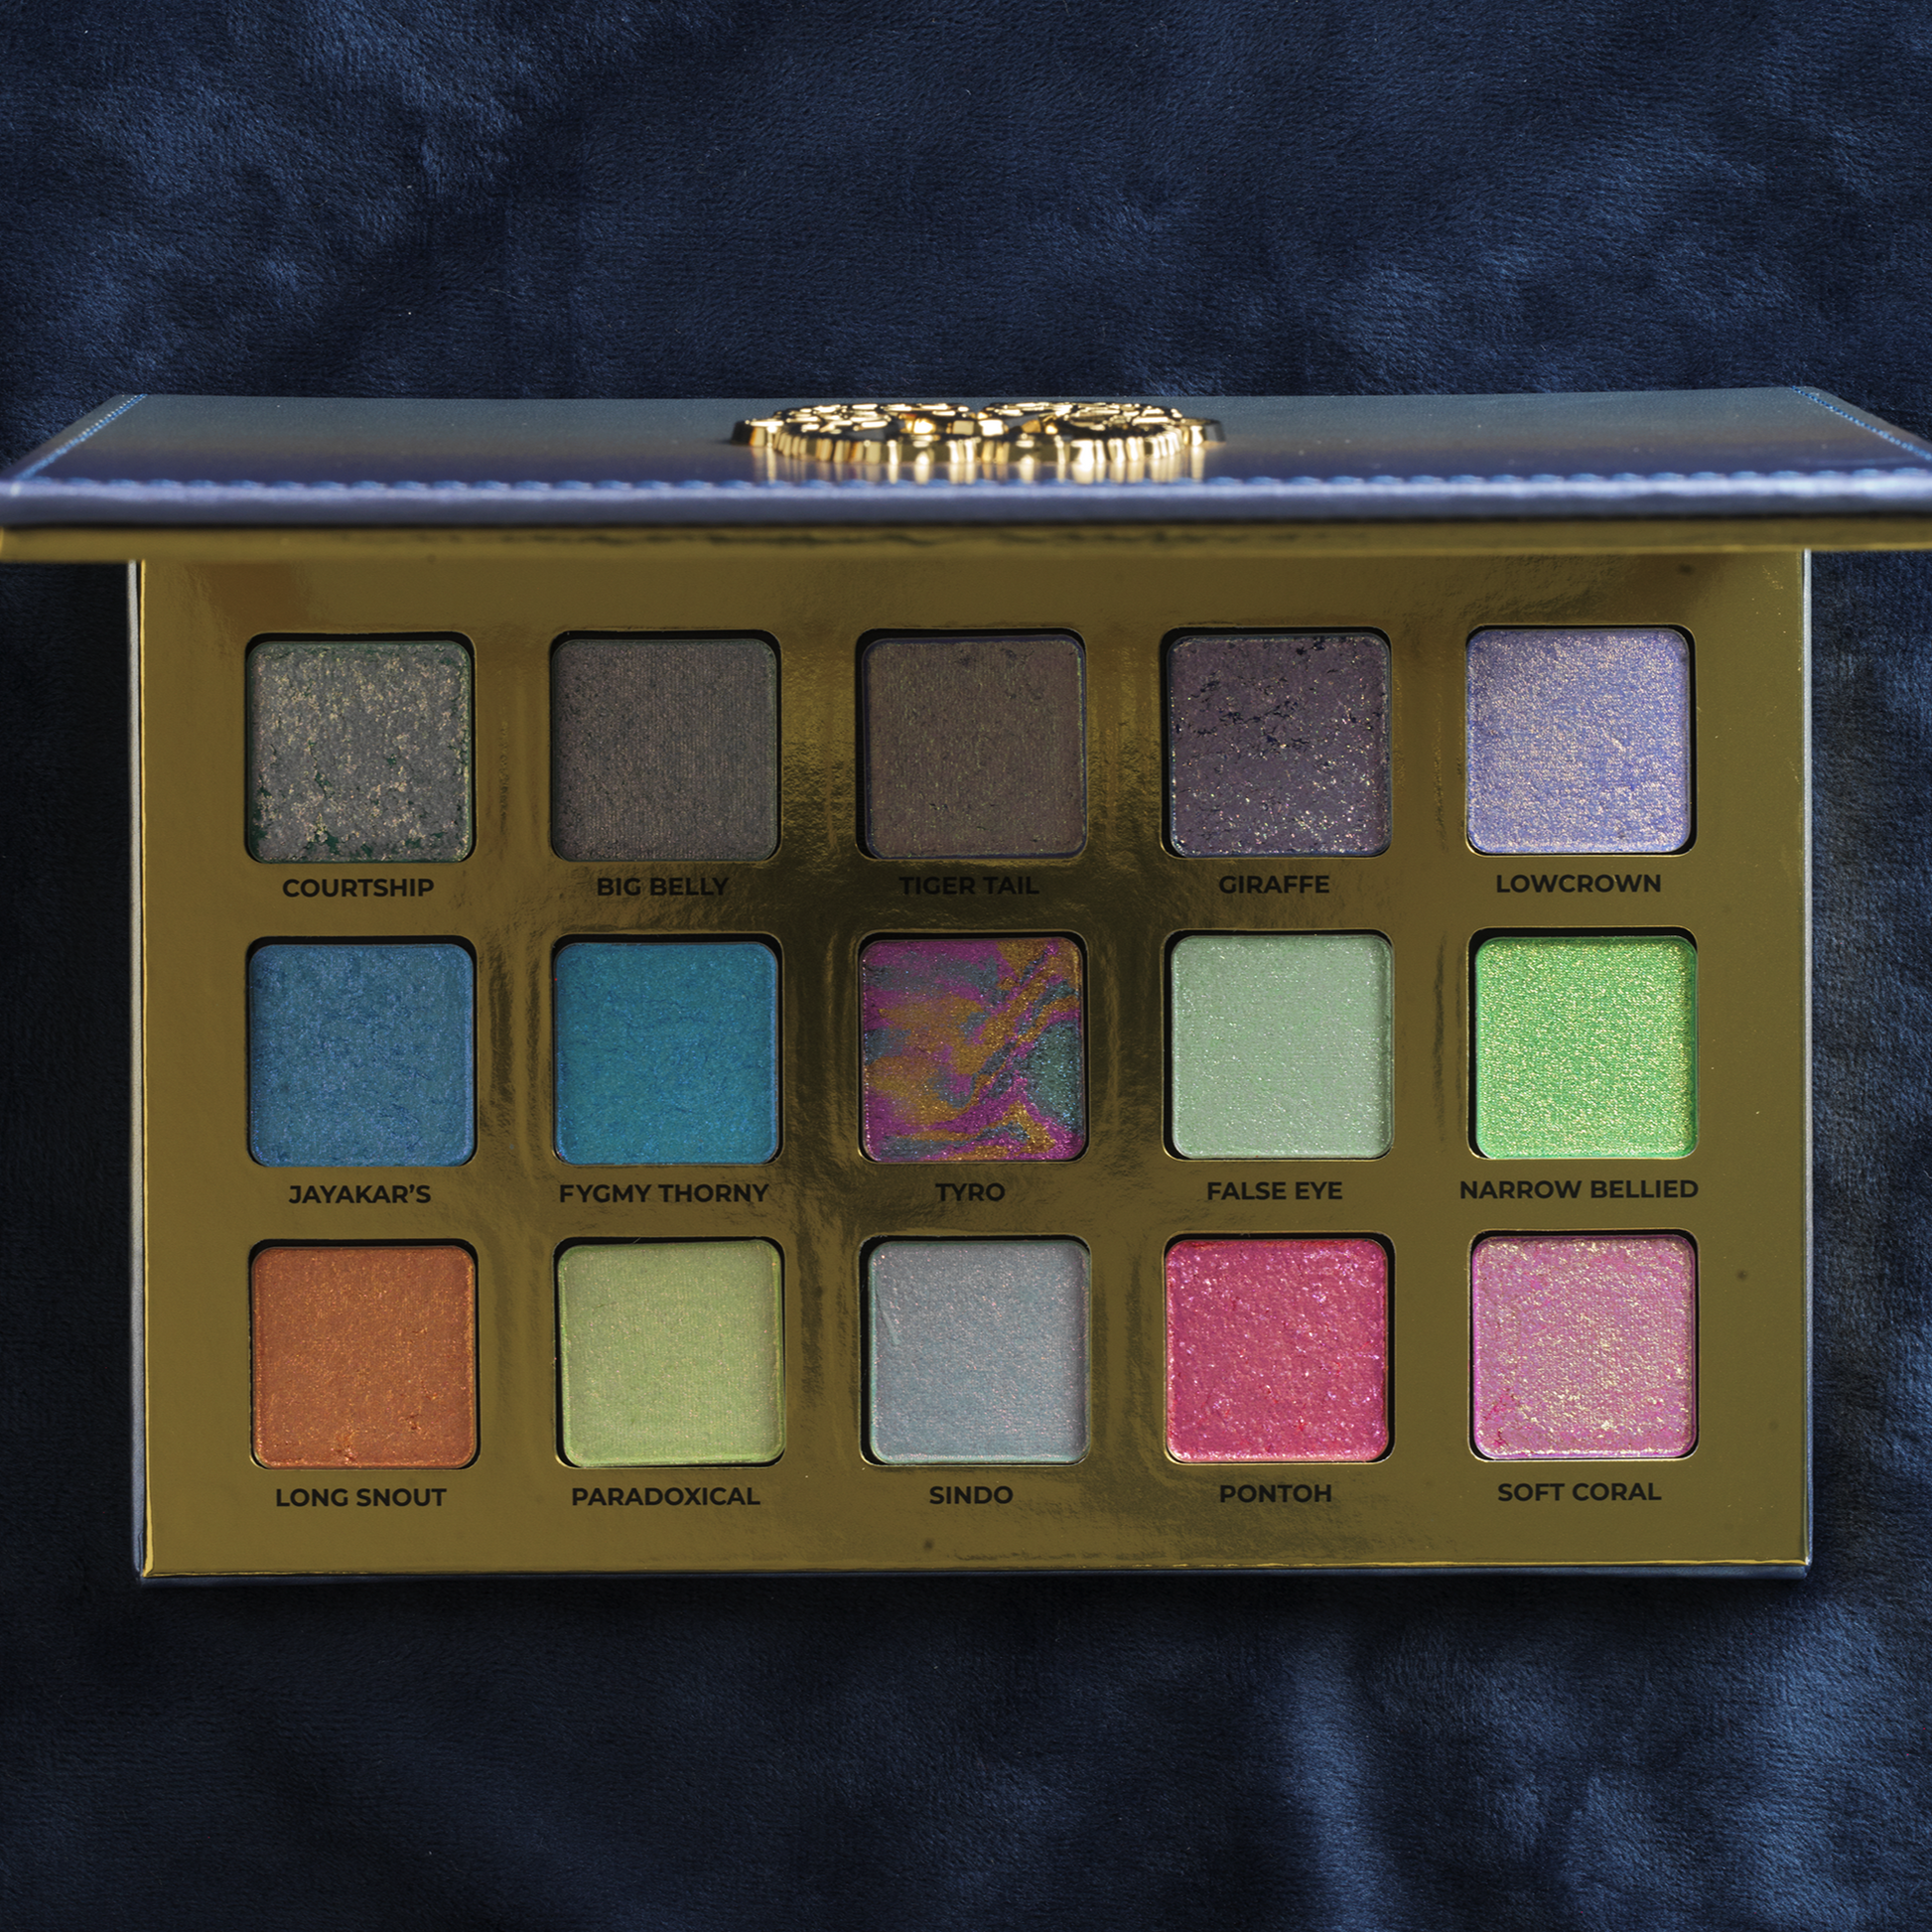 Seahorse palette opened by Adept Cosmetics